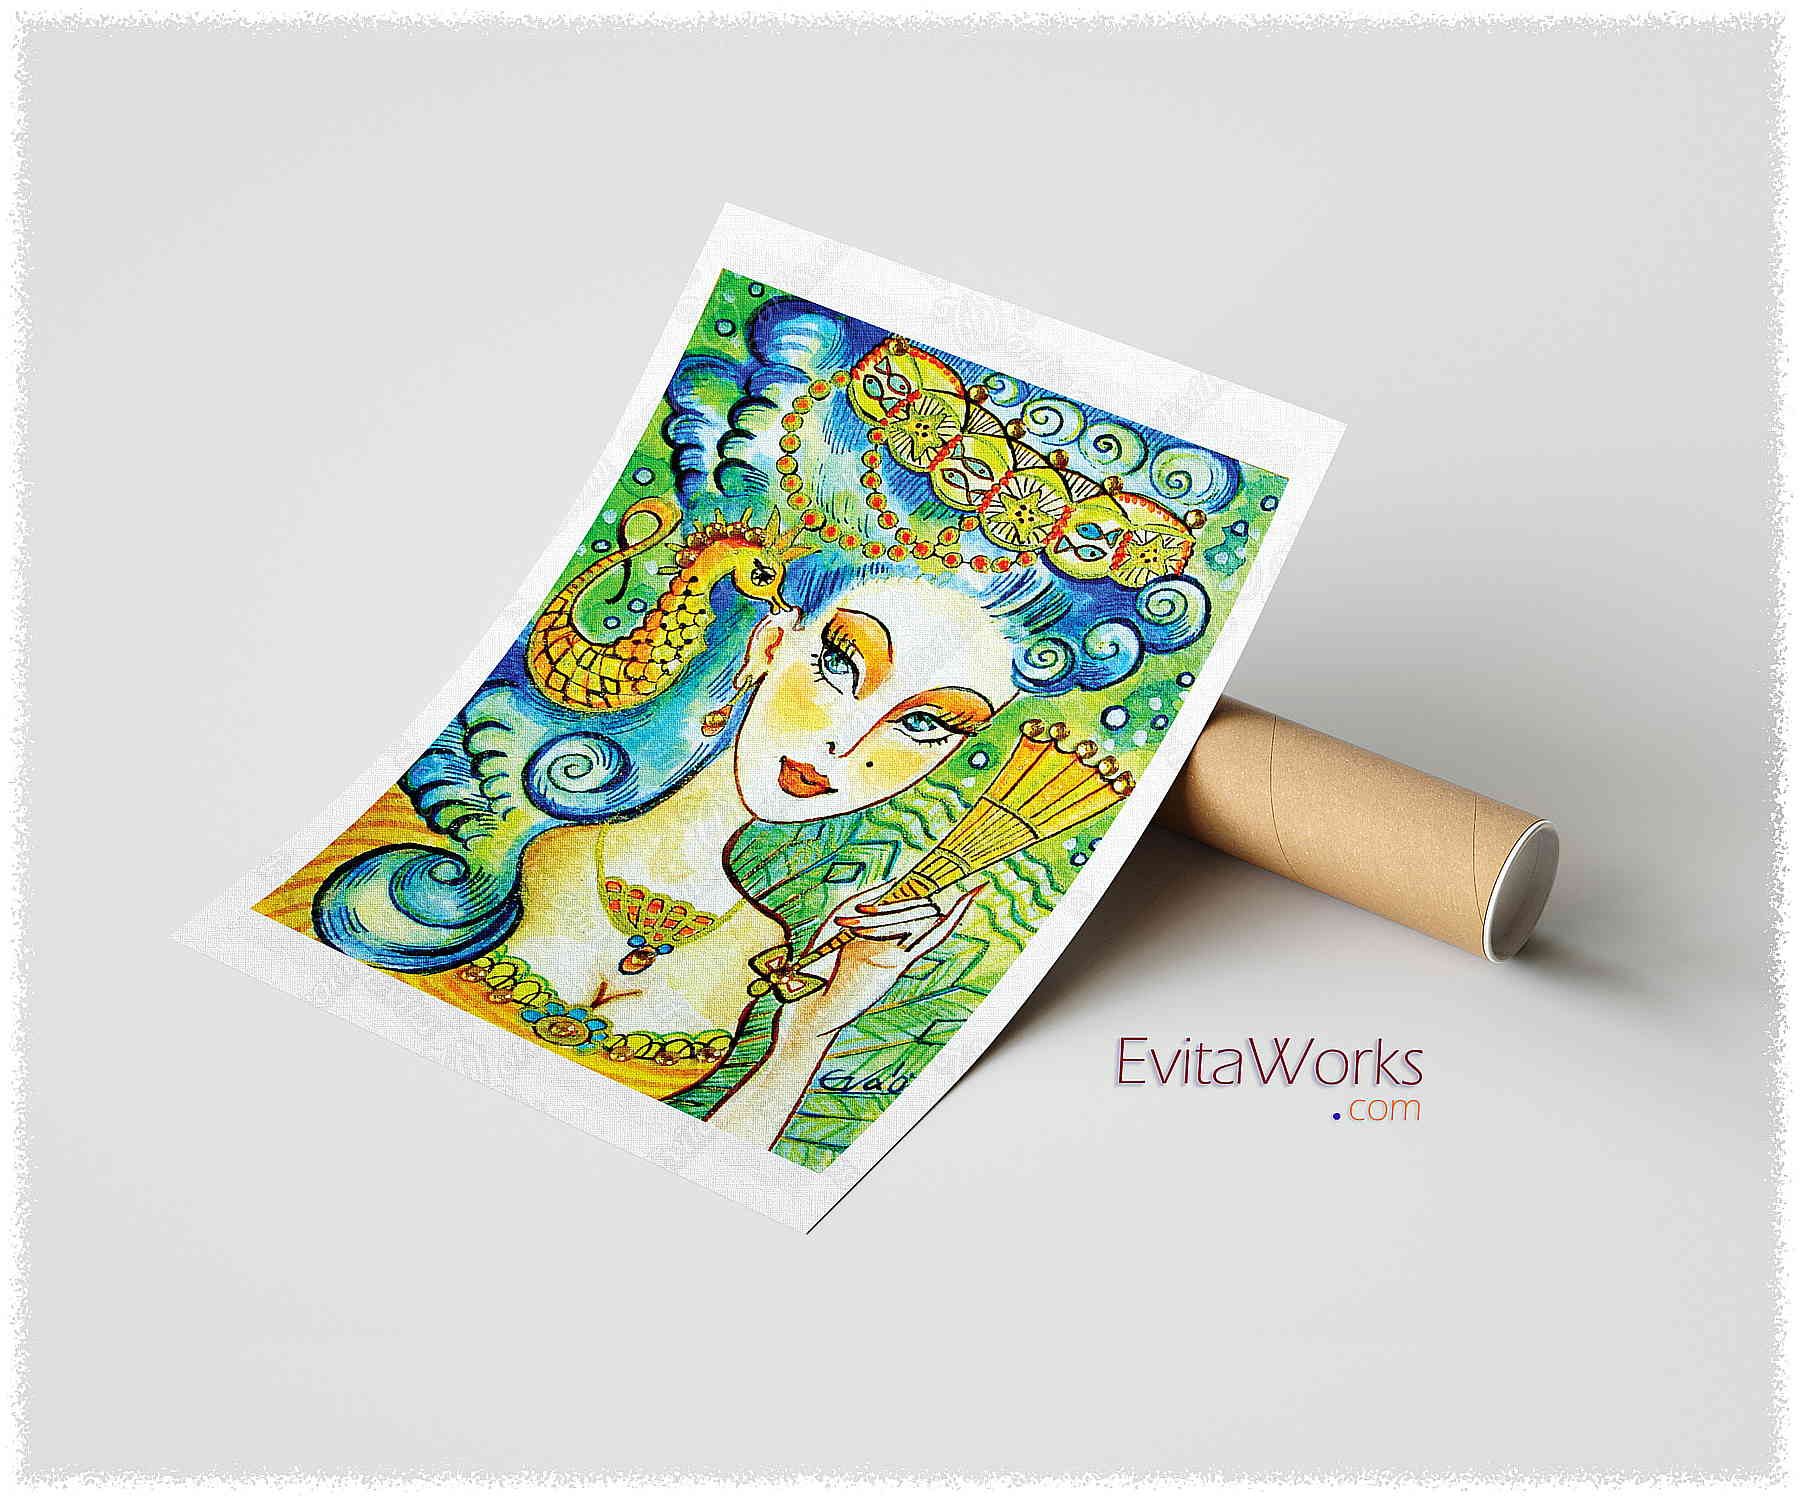 Hit to learn about "Mermaid 51, beautiful female creature" on prints